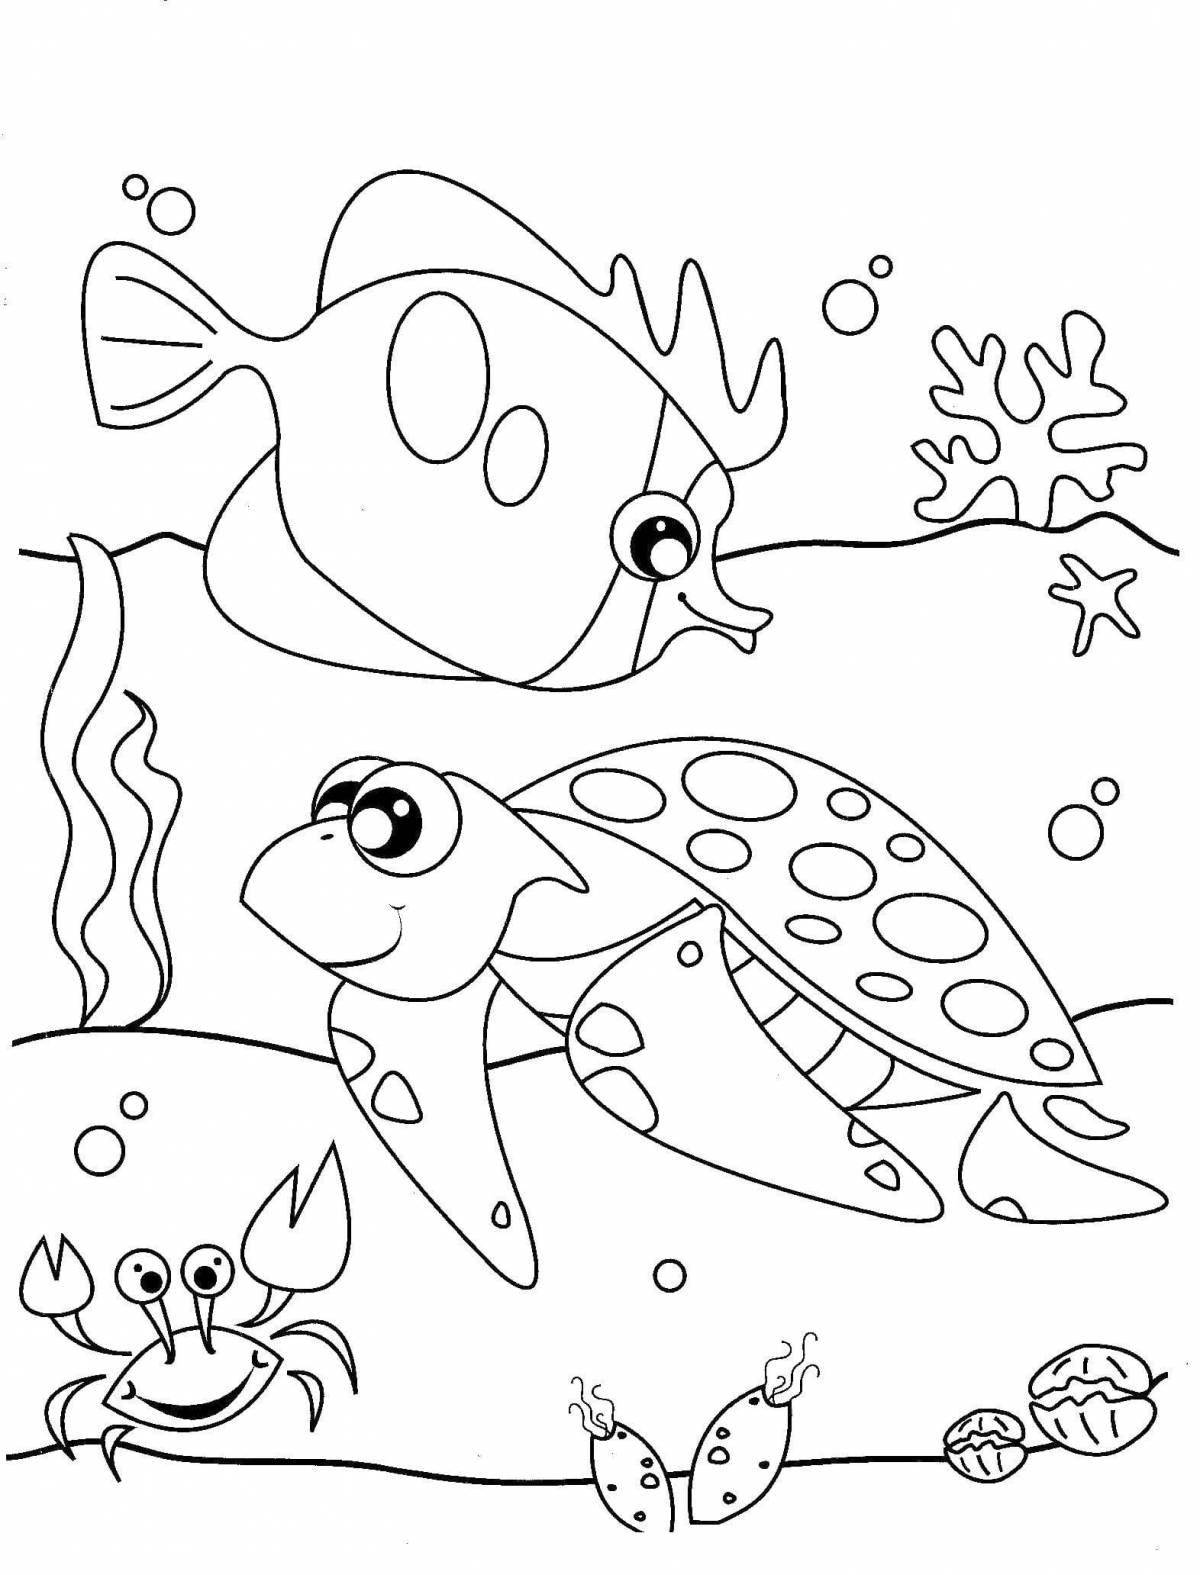 A fun coral reef coloring book for kids